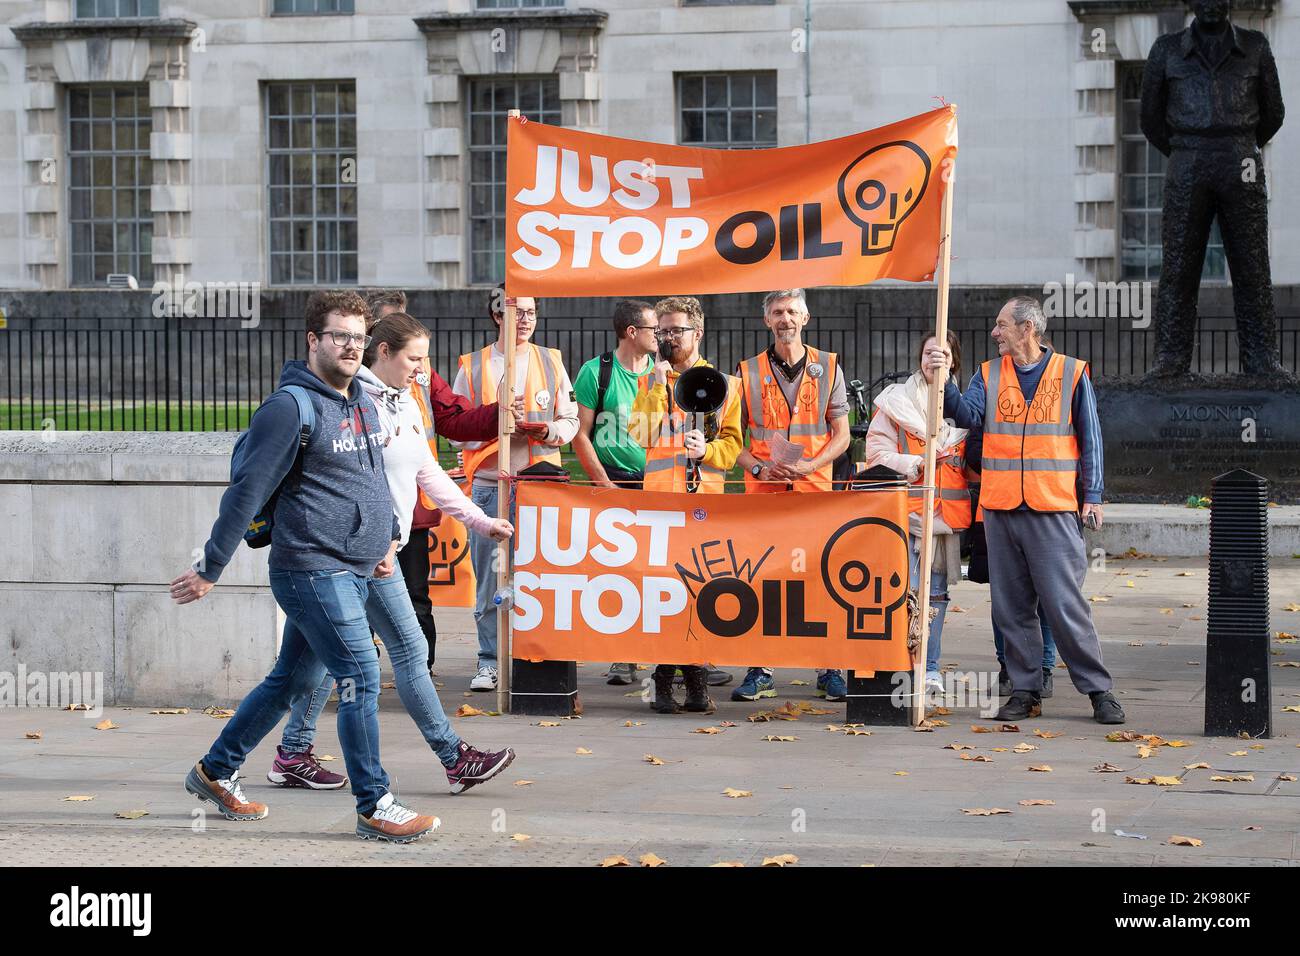 Westminster, London, UK. 26th October, 2022. Just Stop Oil Protesters including climate activist Dr Larch Maxey, were protesting outside Downing Street again today. Just Stop Oil is a coalition of groups working together to ensure that the Government commits to ending all new licenses and consents for the exploration, development and production of fossil fuels in the UK. As part of their campaigning, JSO activists have been spraying orange paint across buildings in London and blocking roads. Credit: Maureen McLean/Alamy Live News Stock Photo